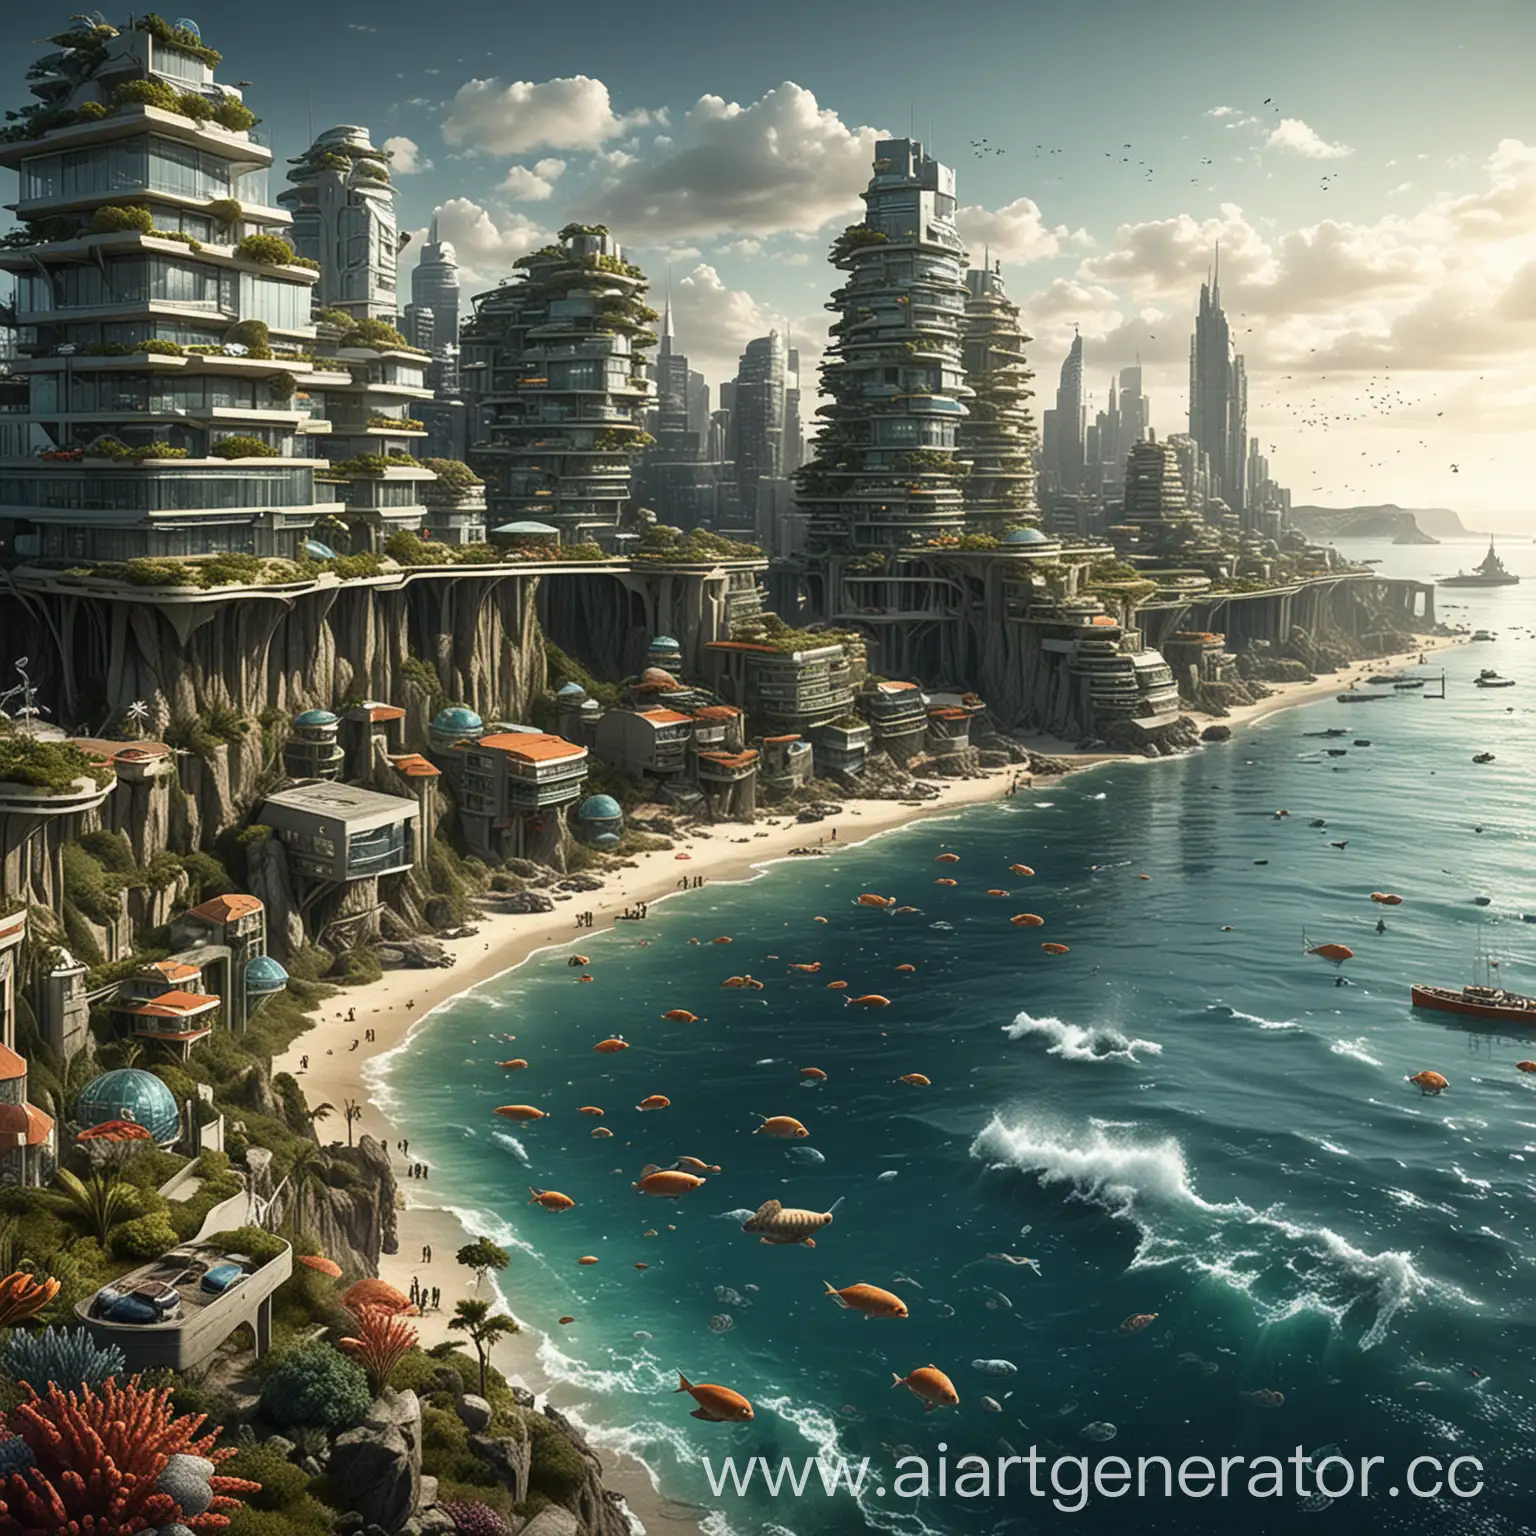 CrossSectional-Illustration-Futuristic-Biogenic-City-in-Atlantic-Style-Surrounded-by-Ocean